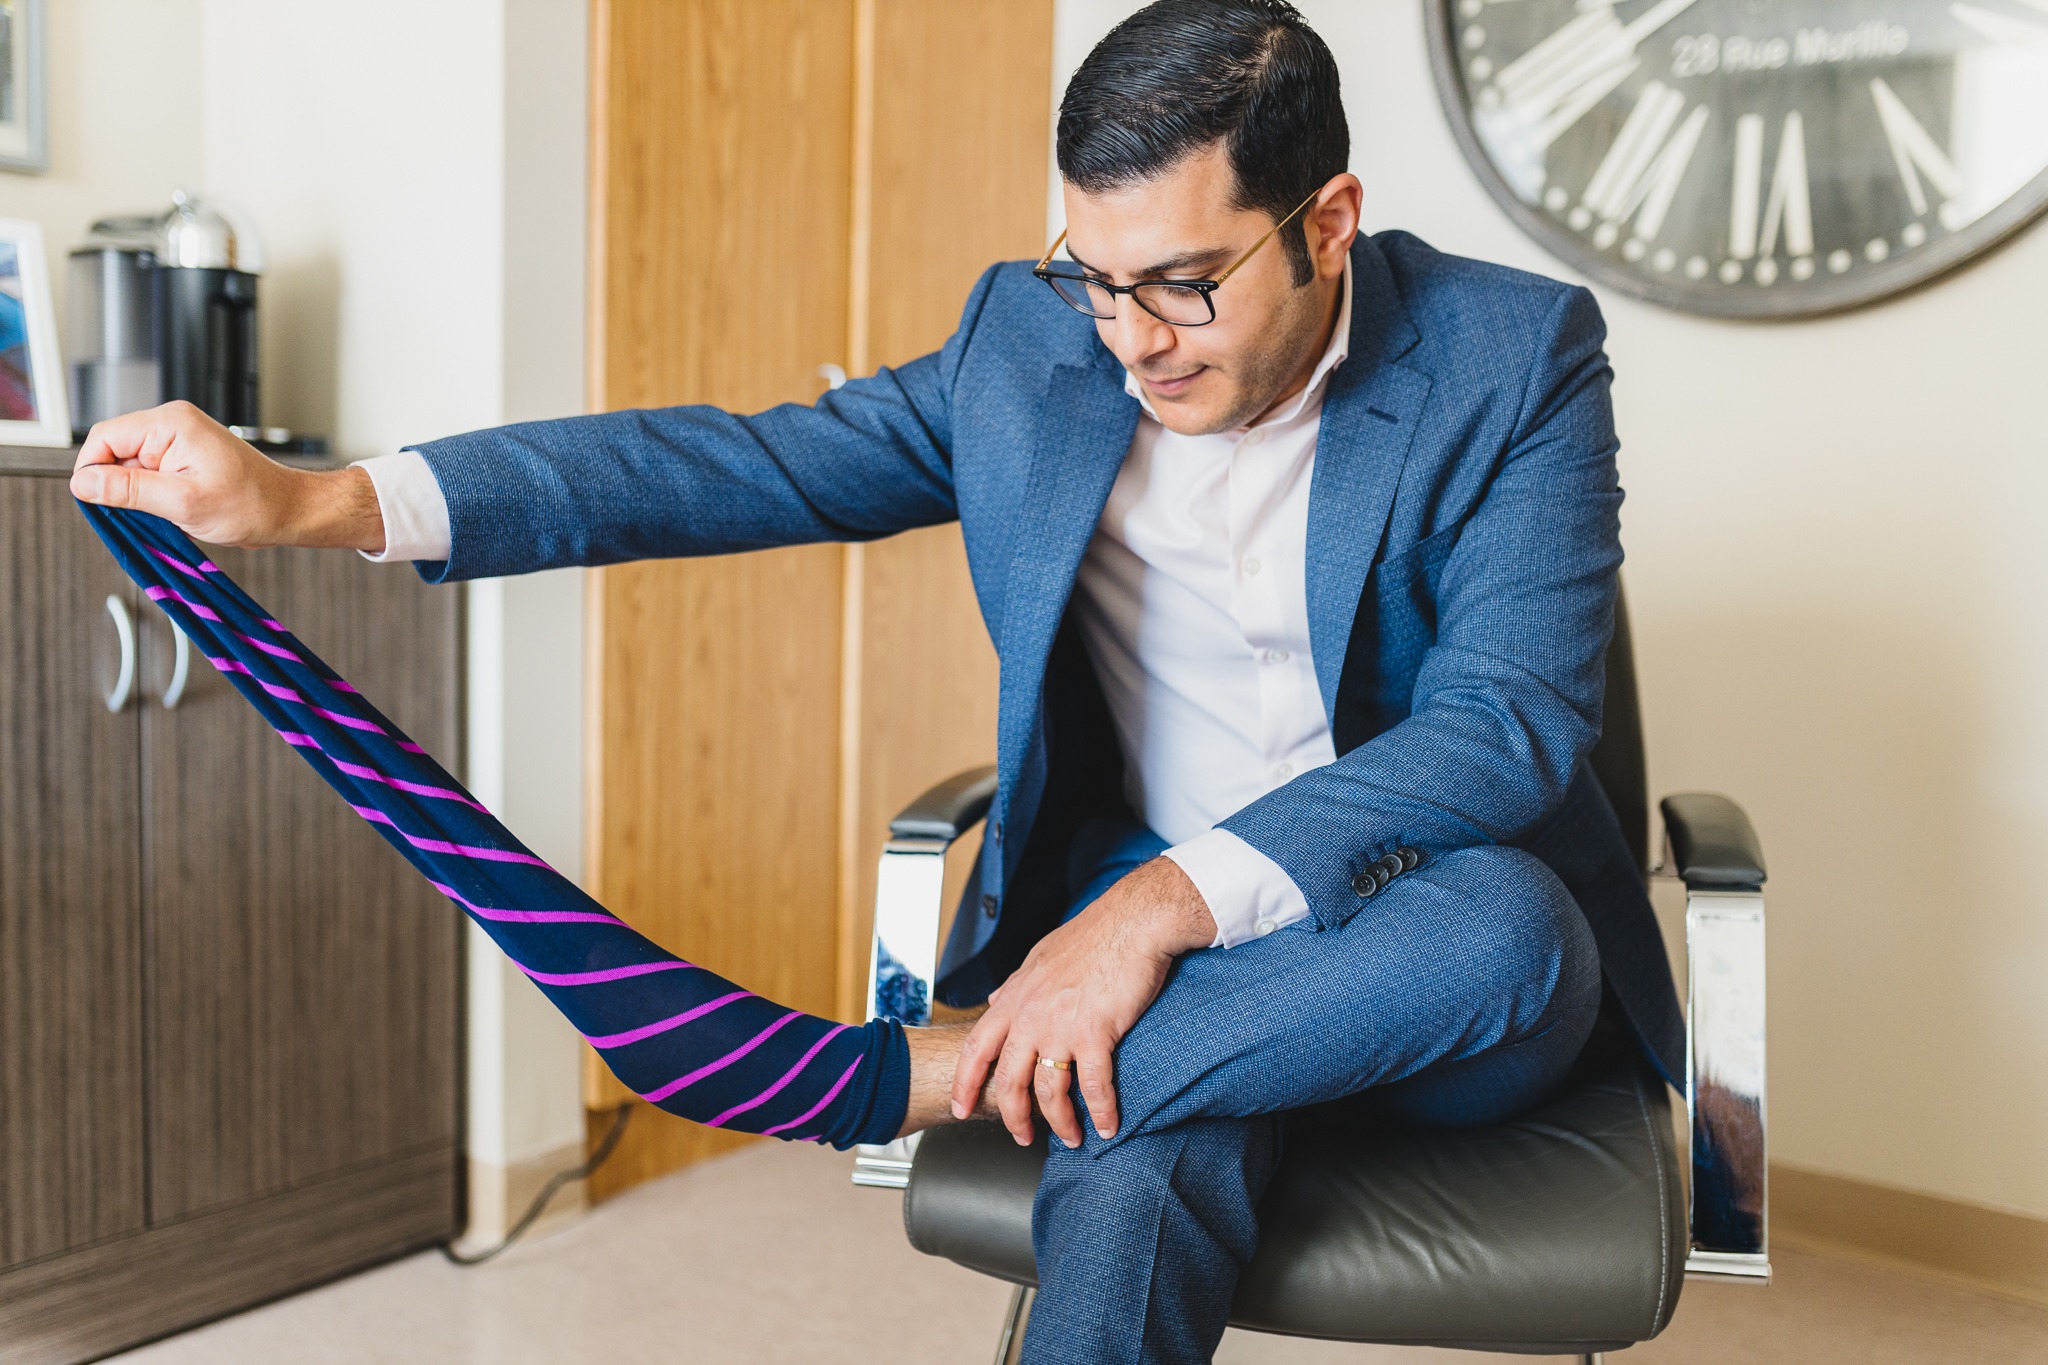 Hamilton Health Sciences vascular surgeon Dr. Fadi Elias is helping to lead a new campaign called Socks Off, aimed at reducing the number of lower Hamilton residents who lose a foot to amputation due to diabetes and/or vascular disease.